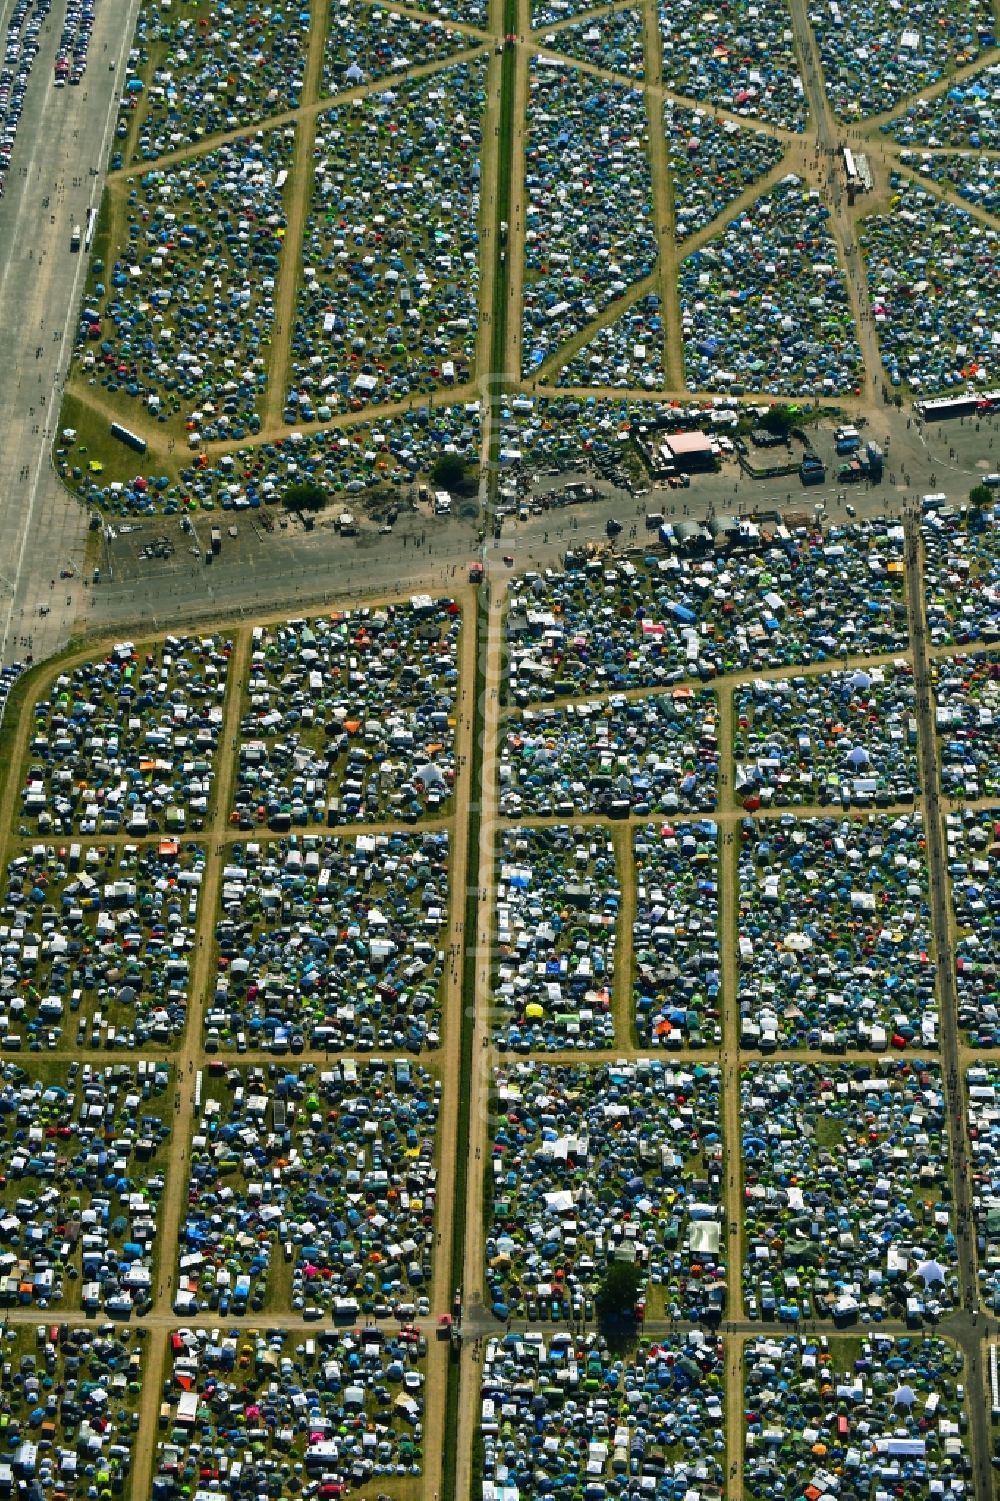 Lärz from above - Crowd of visitors to the Fusion Festival at the airfield Laerz - Rechlin in Laerz in Mecklenburg-Vorpommern, Germany